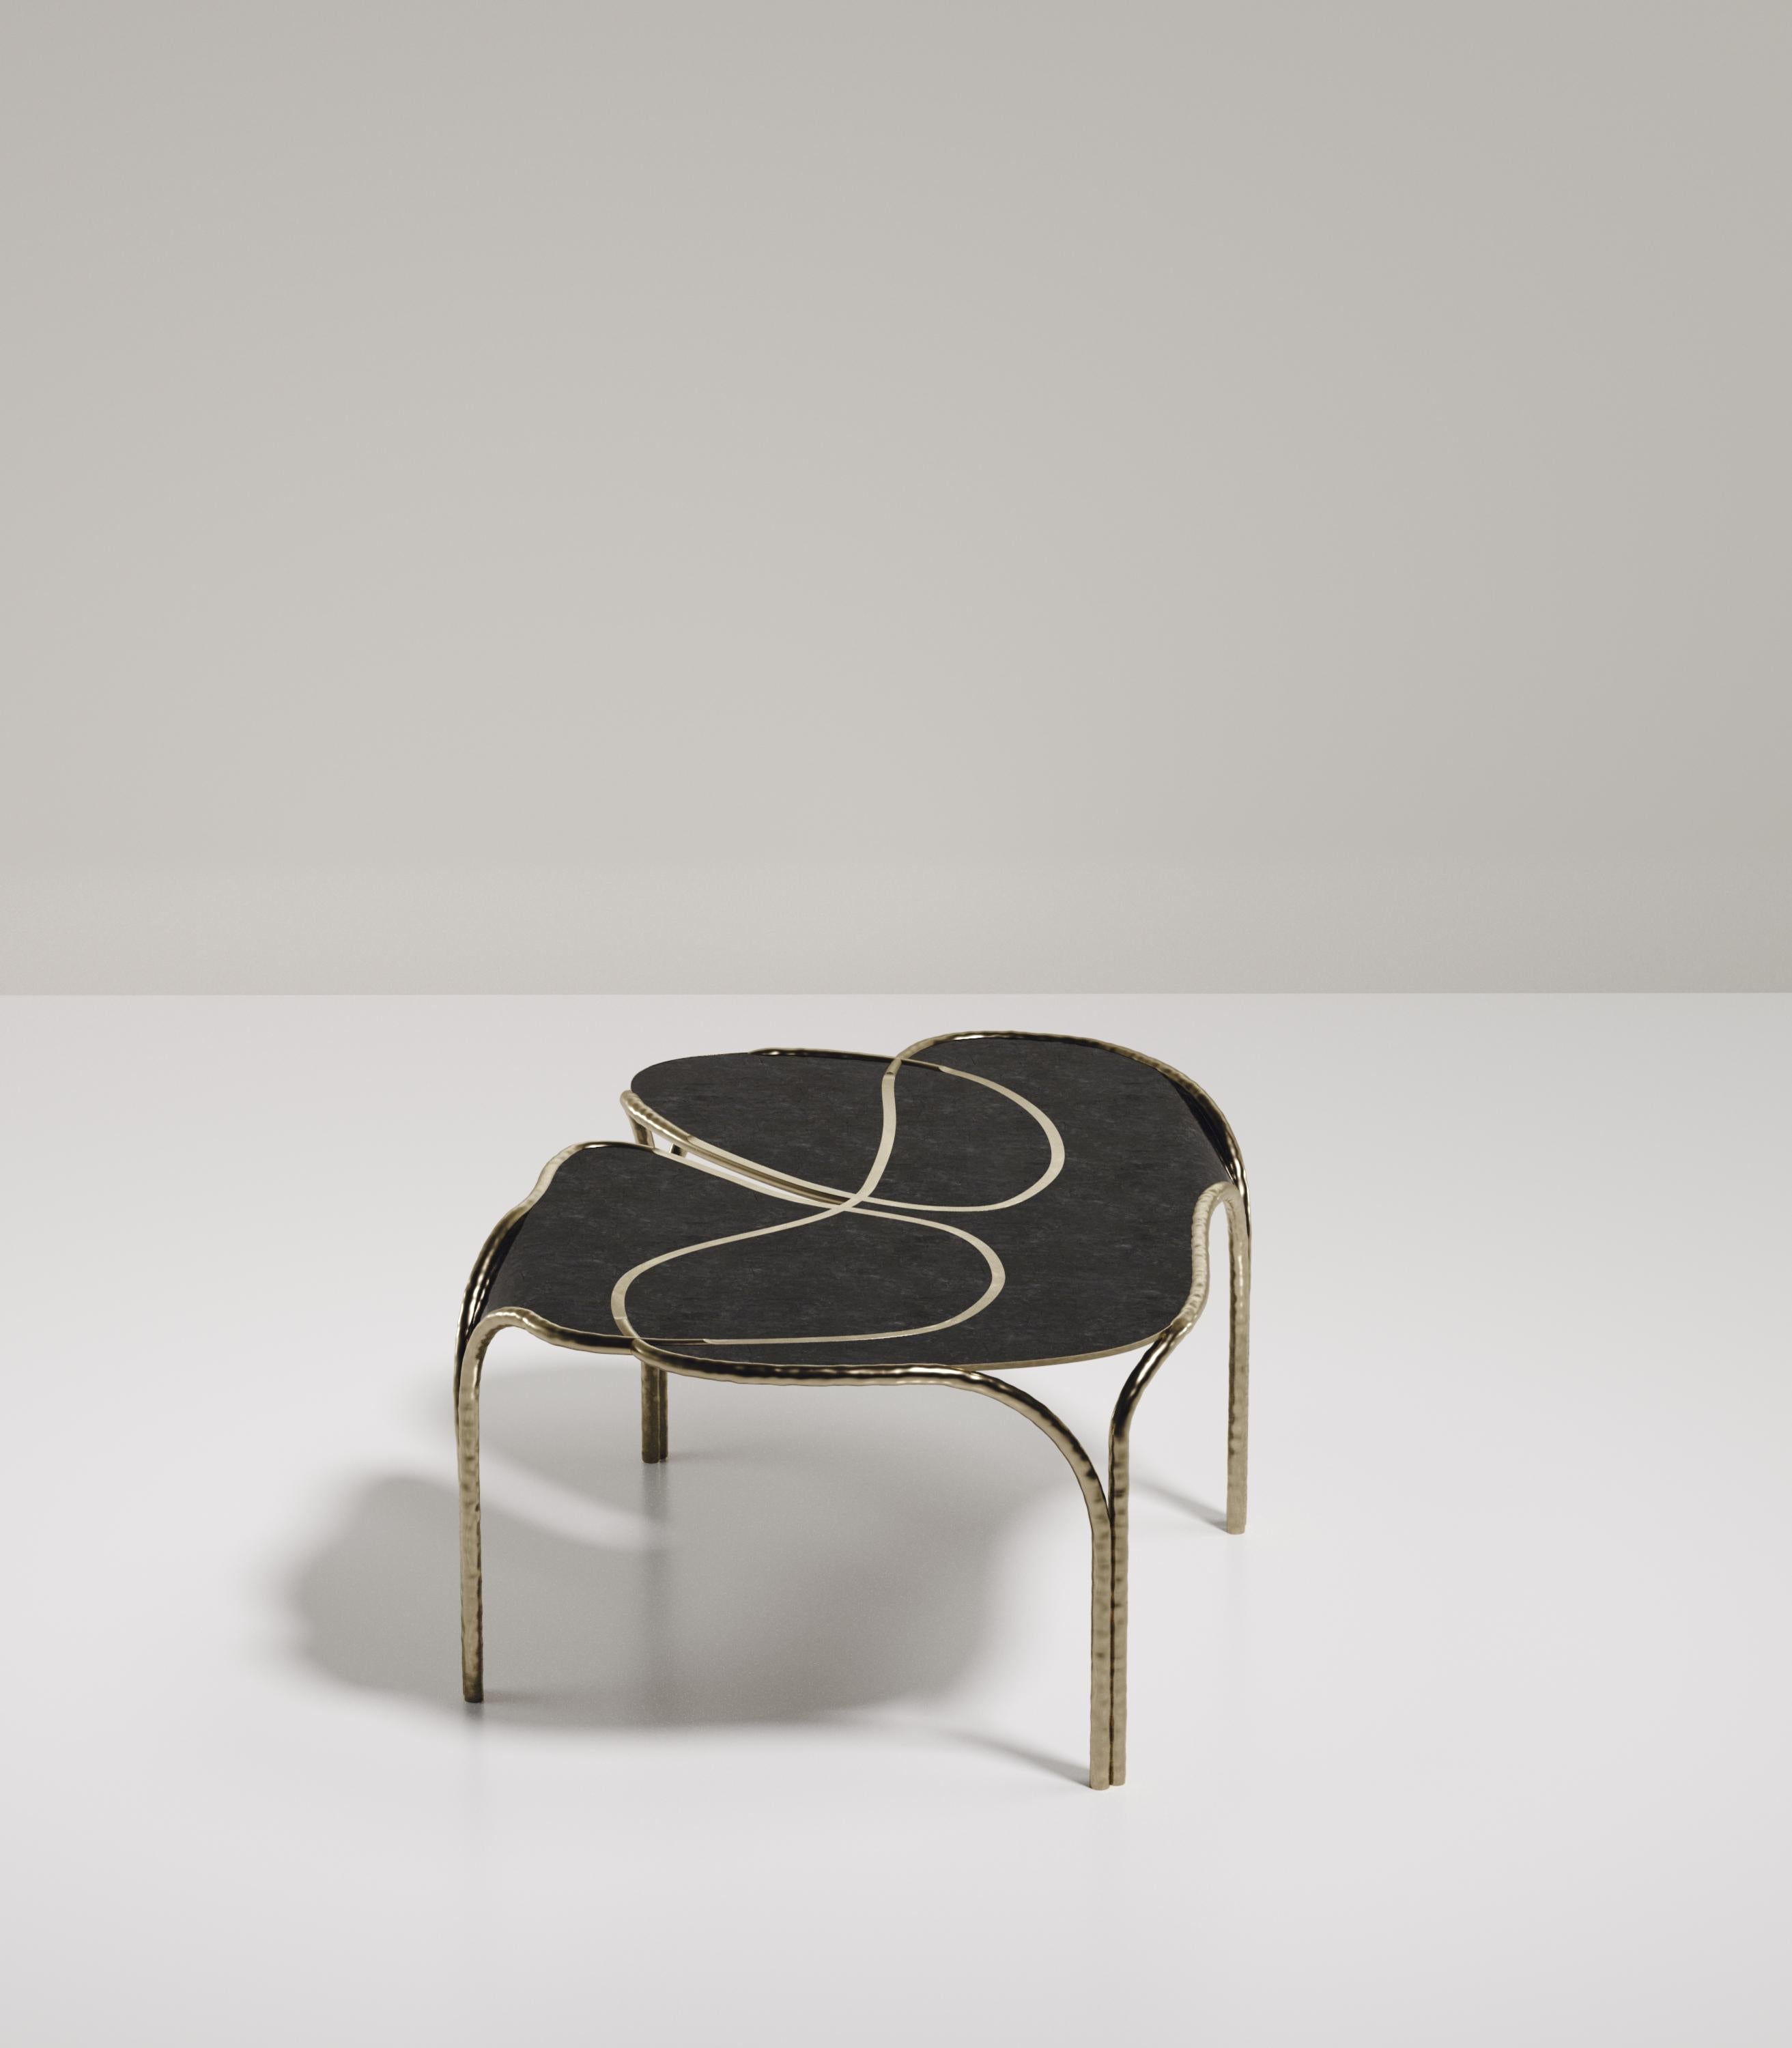 The Arianne coffee table by R&Y Augousti is one of a kind statement and whimsical piece. The overall piece is inlaid in black pen shell accentuated with intricate bronze-patina brass details that have the signature Augousti 